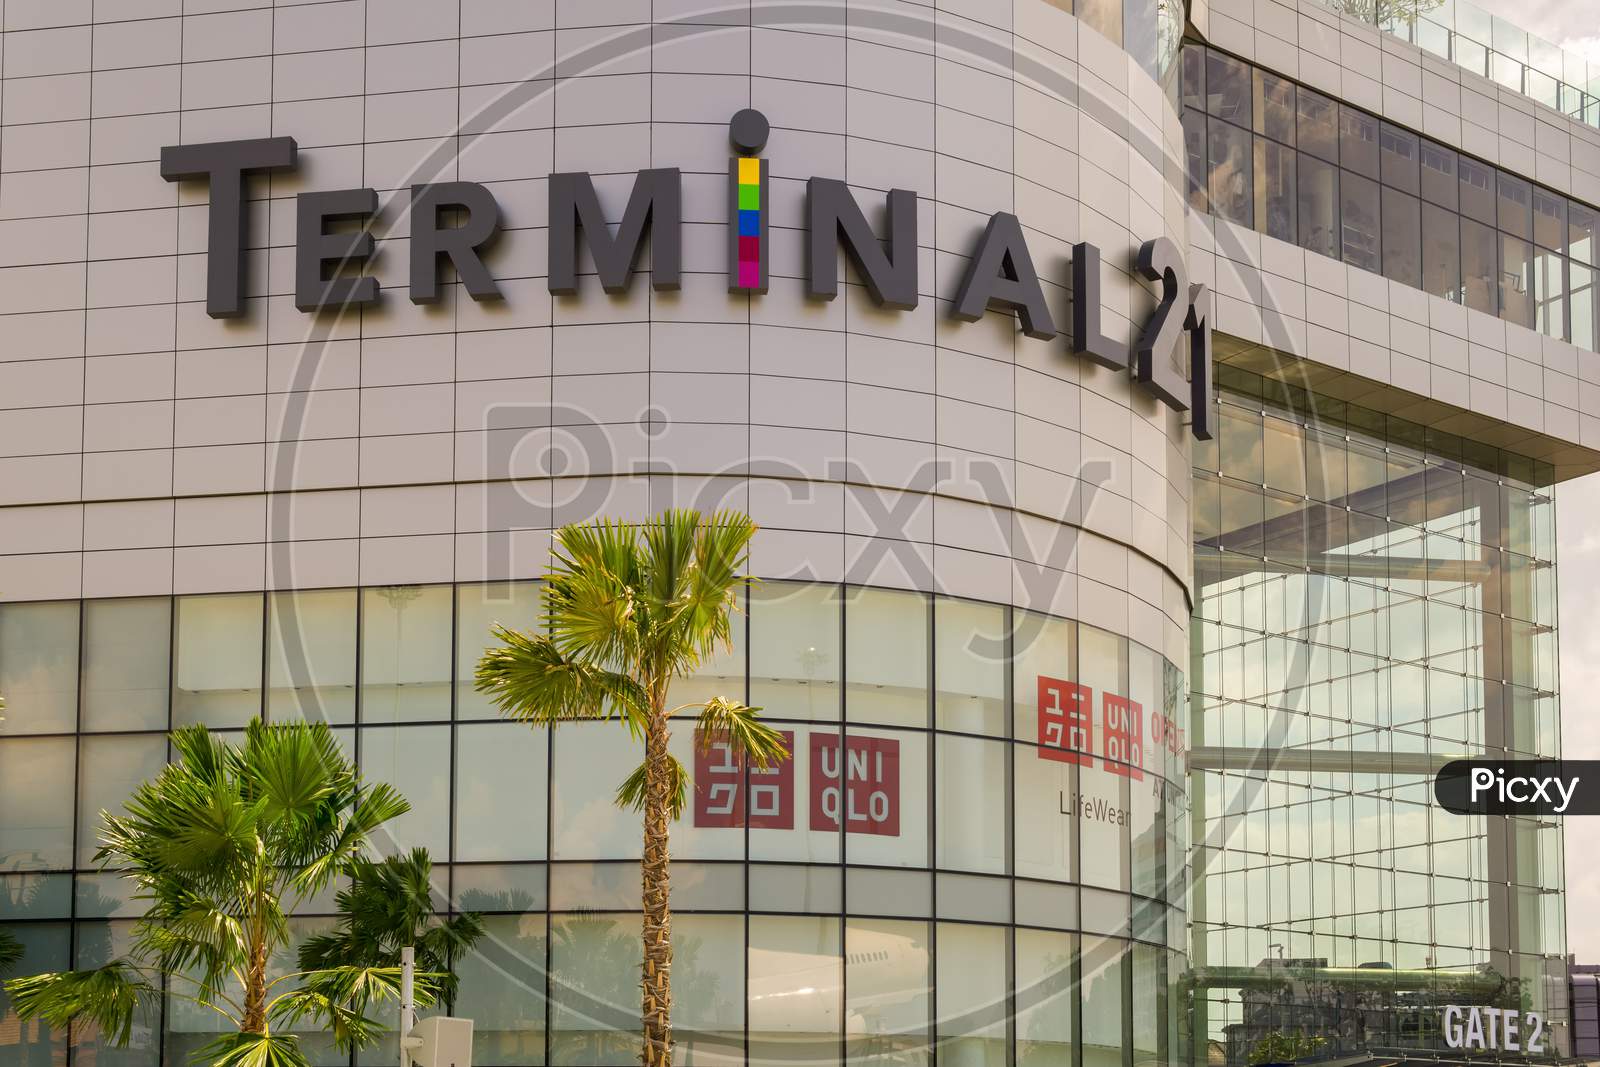 Pattaya,Thailand - October 12,2018: Terminal 21 This Is The Big,New Mall In Second Road Before The Opening Seven Days Later. It Contains Many Shops,Restaurants And A Cinema.